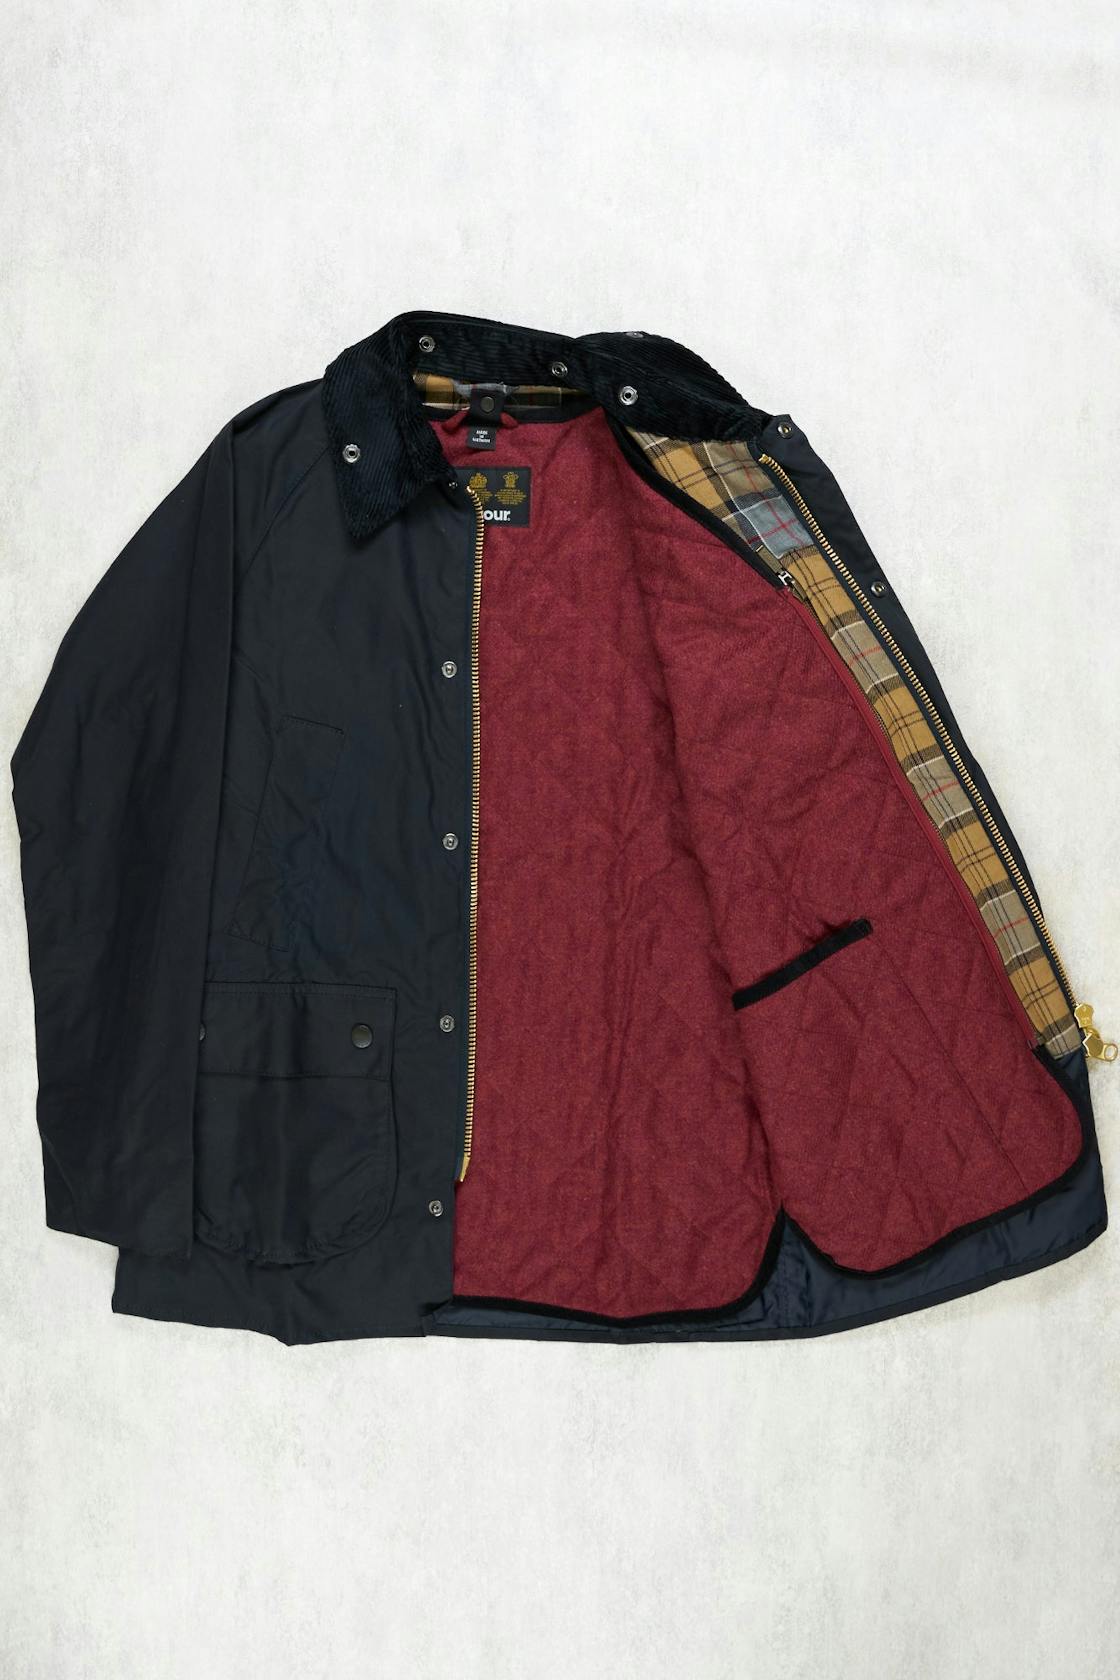 Barbour Navy SL Bedale Jacket with Liner